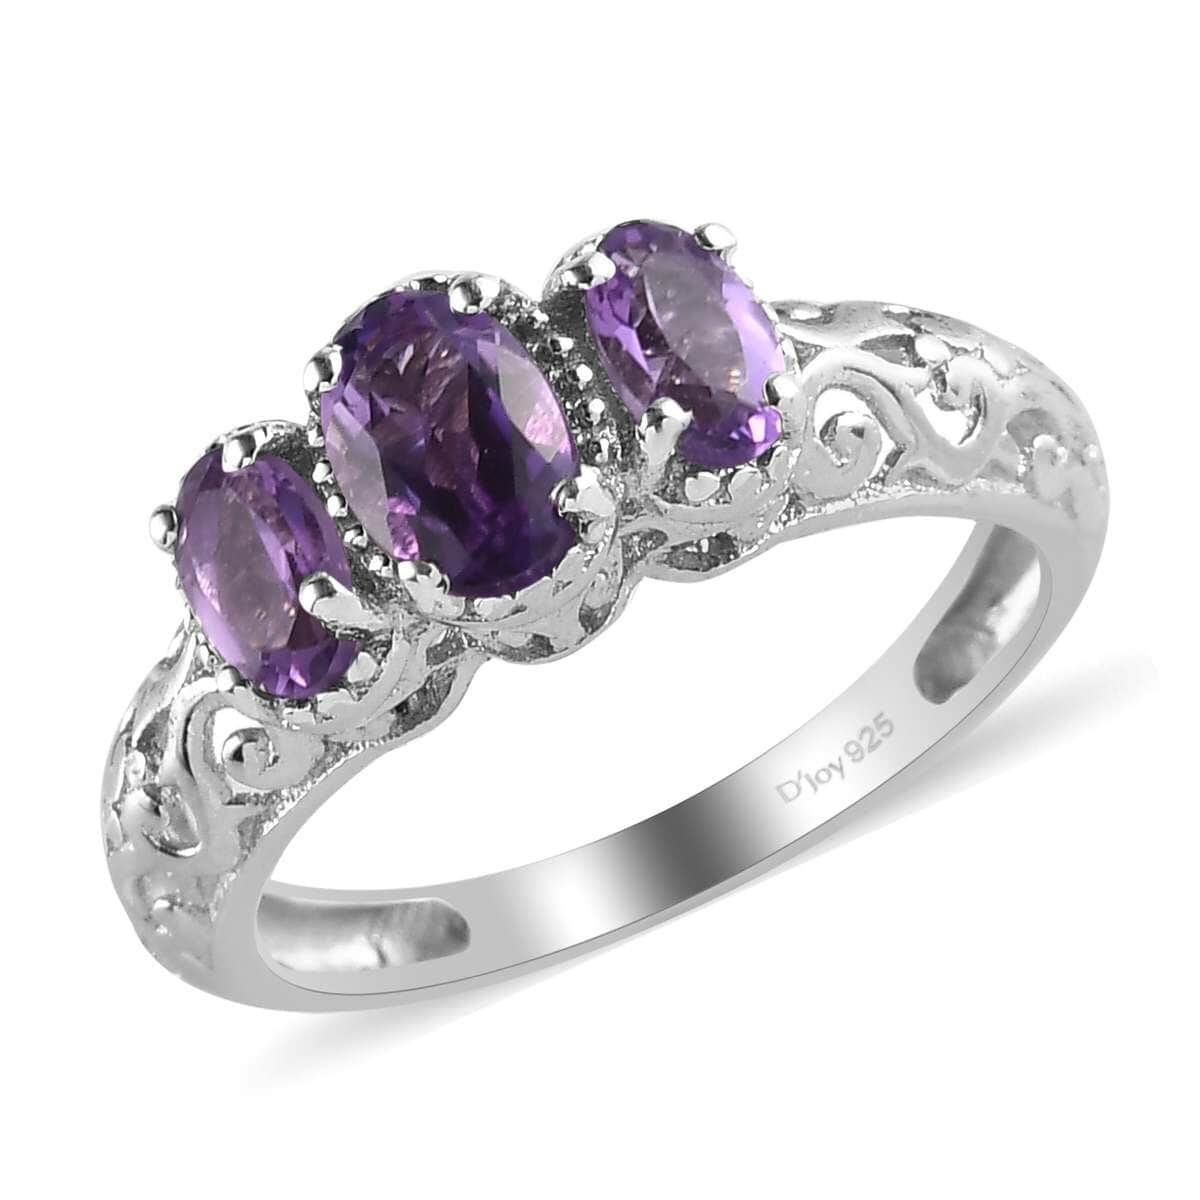 Amethyst Ring, 3 Stone Amethyst Ring, Trilogy Ring, Sterling Silver Ring, Birthstone Jewelry, Amethyst 3 Stone Ring 0.85 ctw (Size 10.0) image number 0